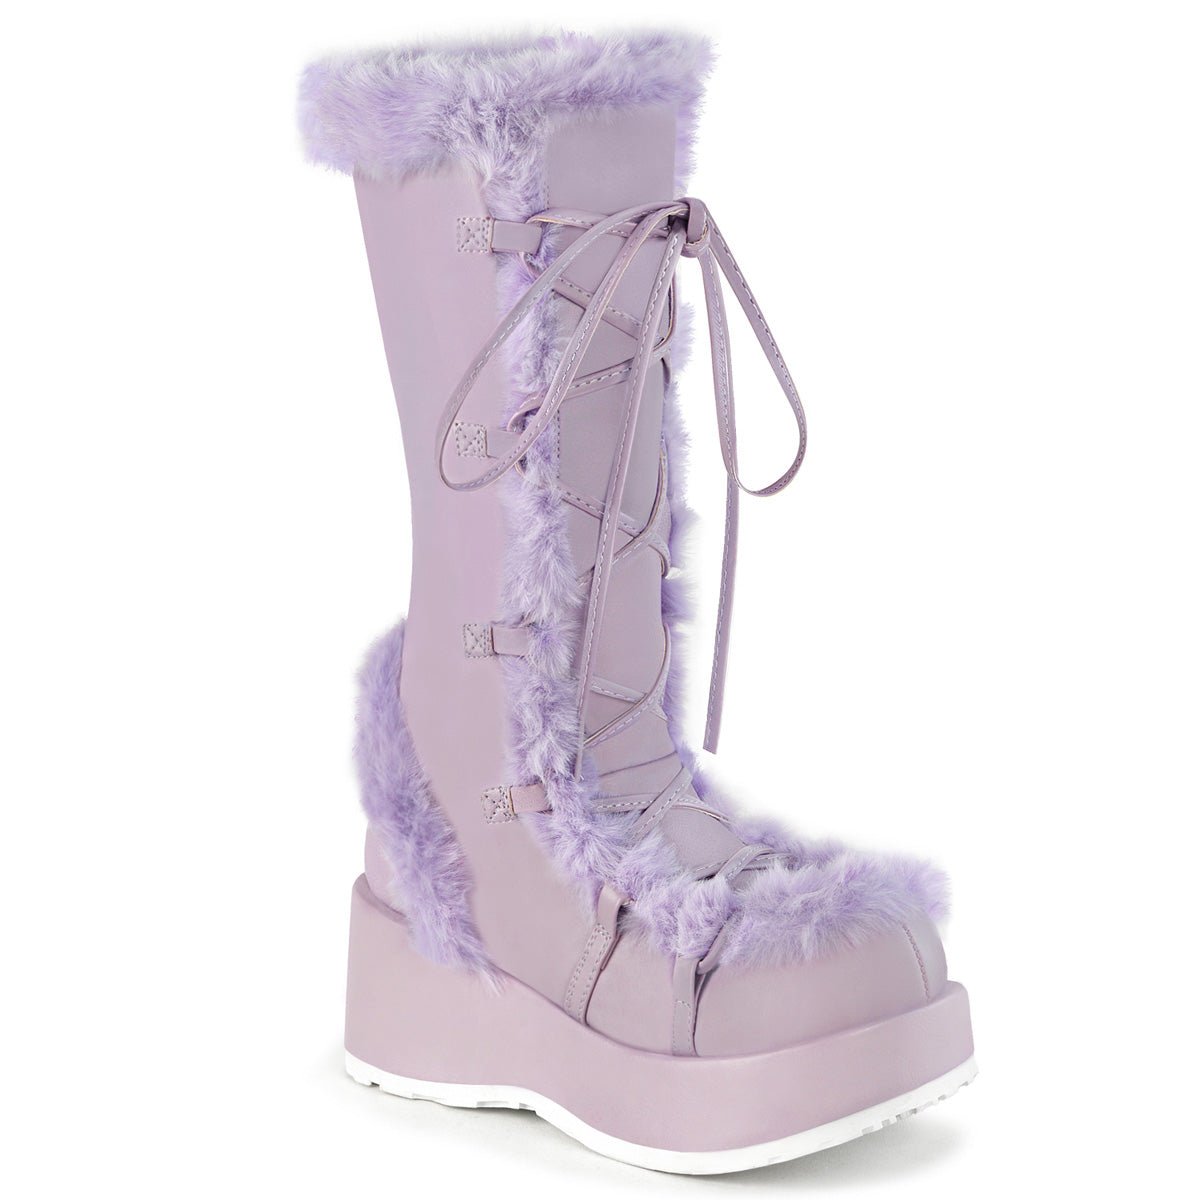 Too Fast | Demonia Cubby 311 | Lavender Vegan Leather Women's Mid Calf Boots